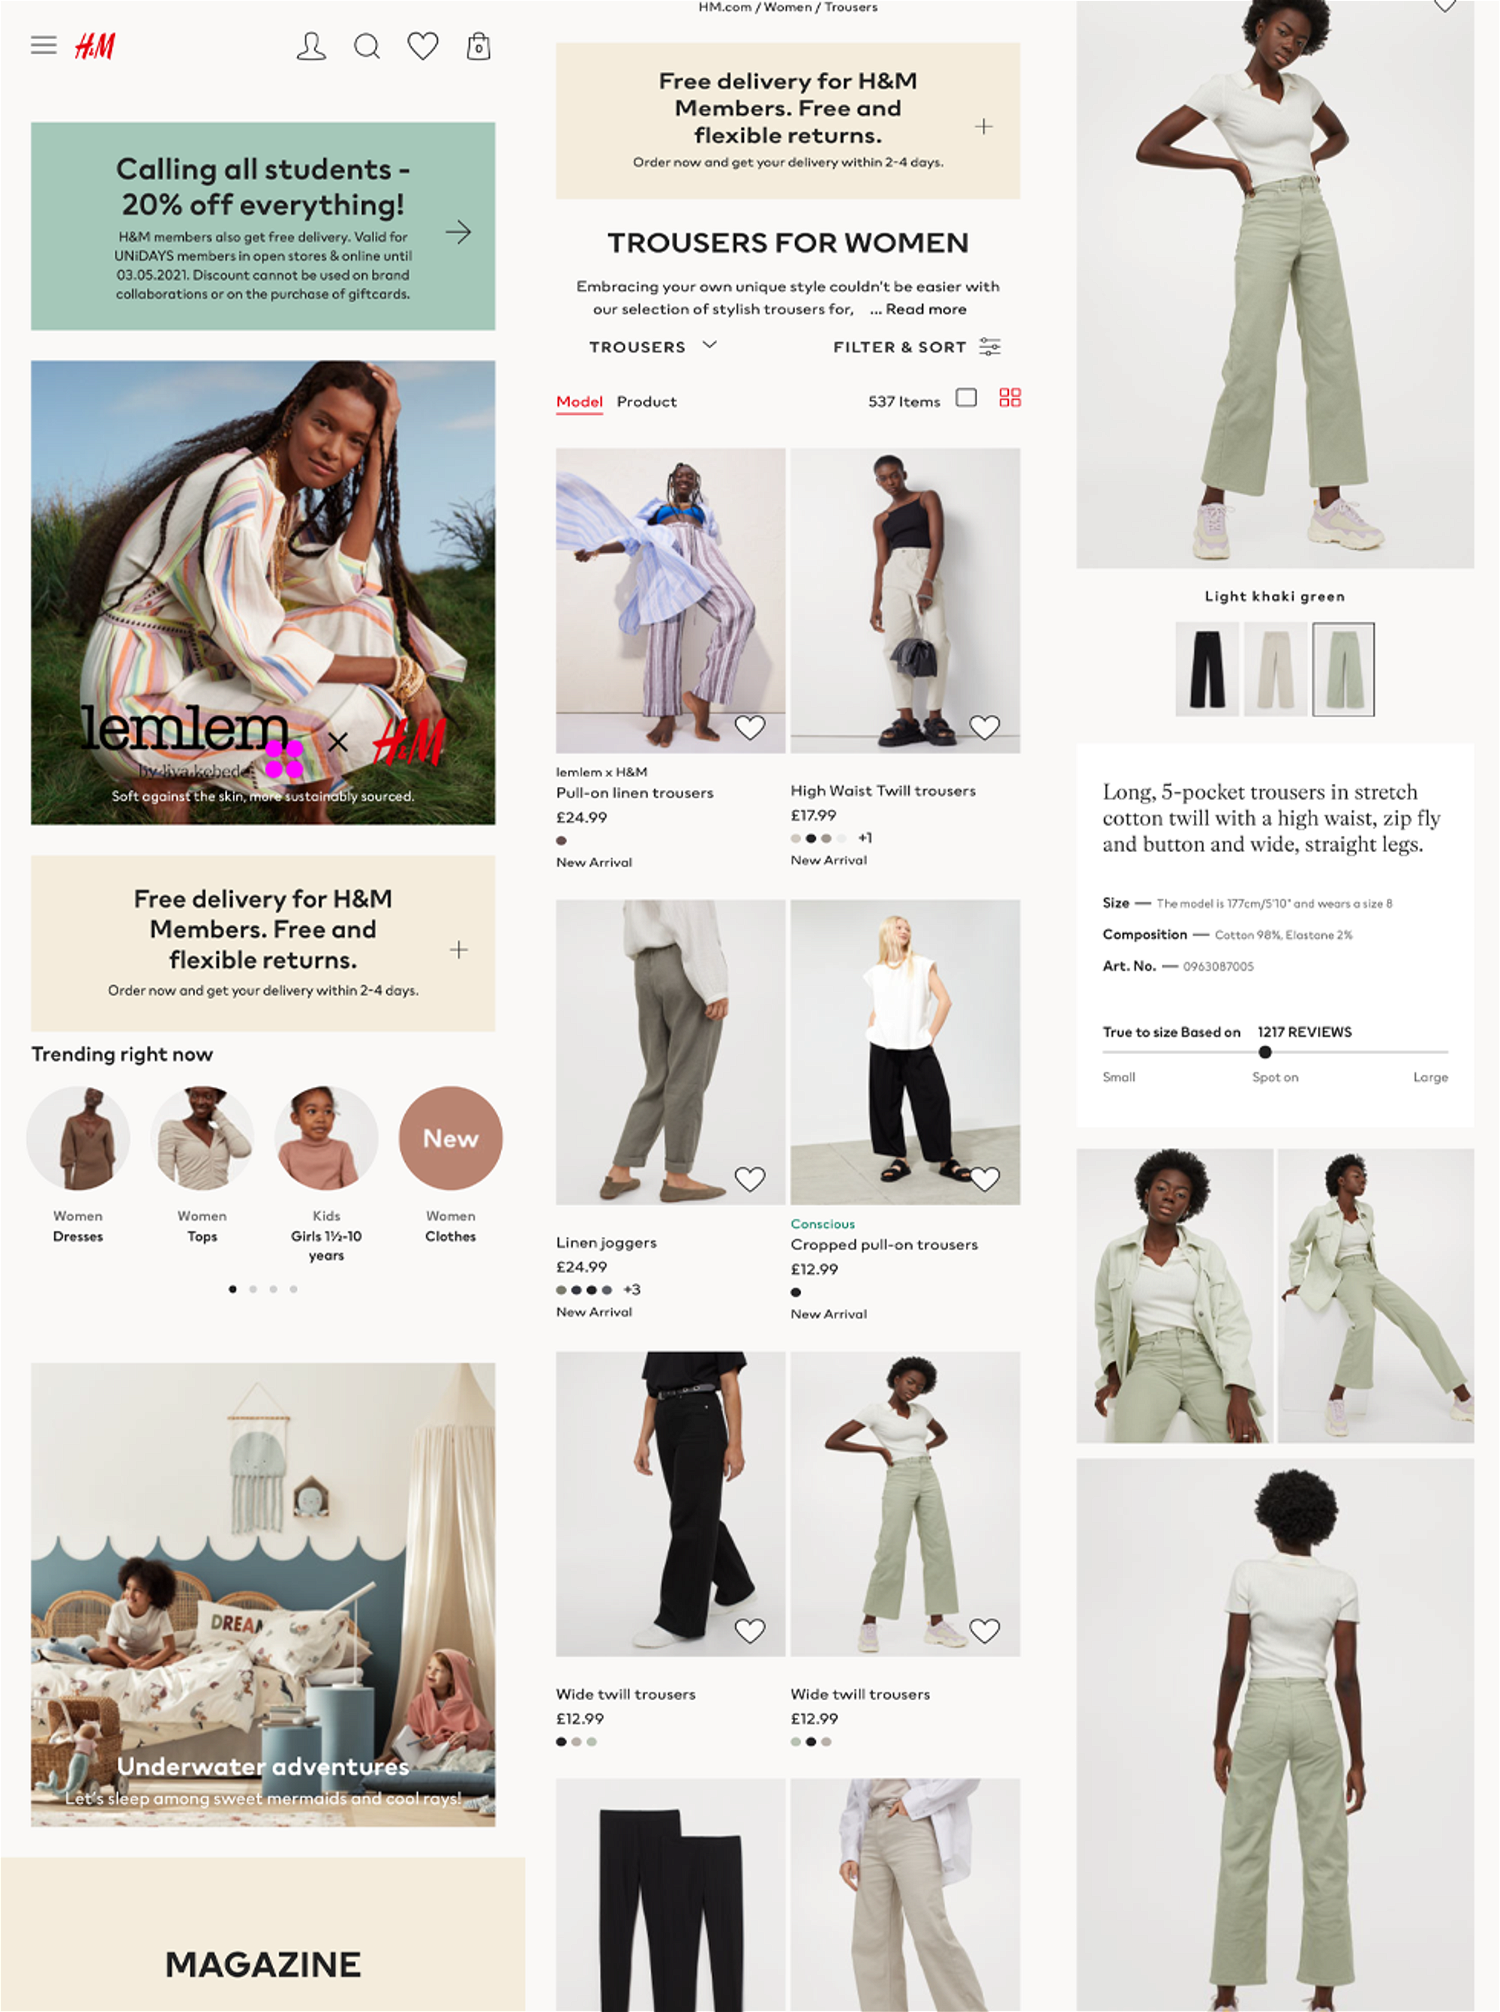 H&M's Mobile main page, category page and product page (left to right)